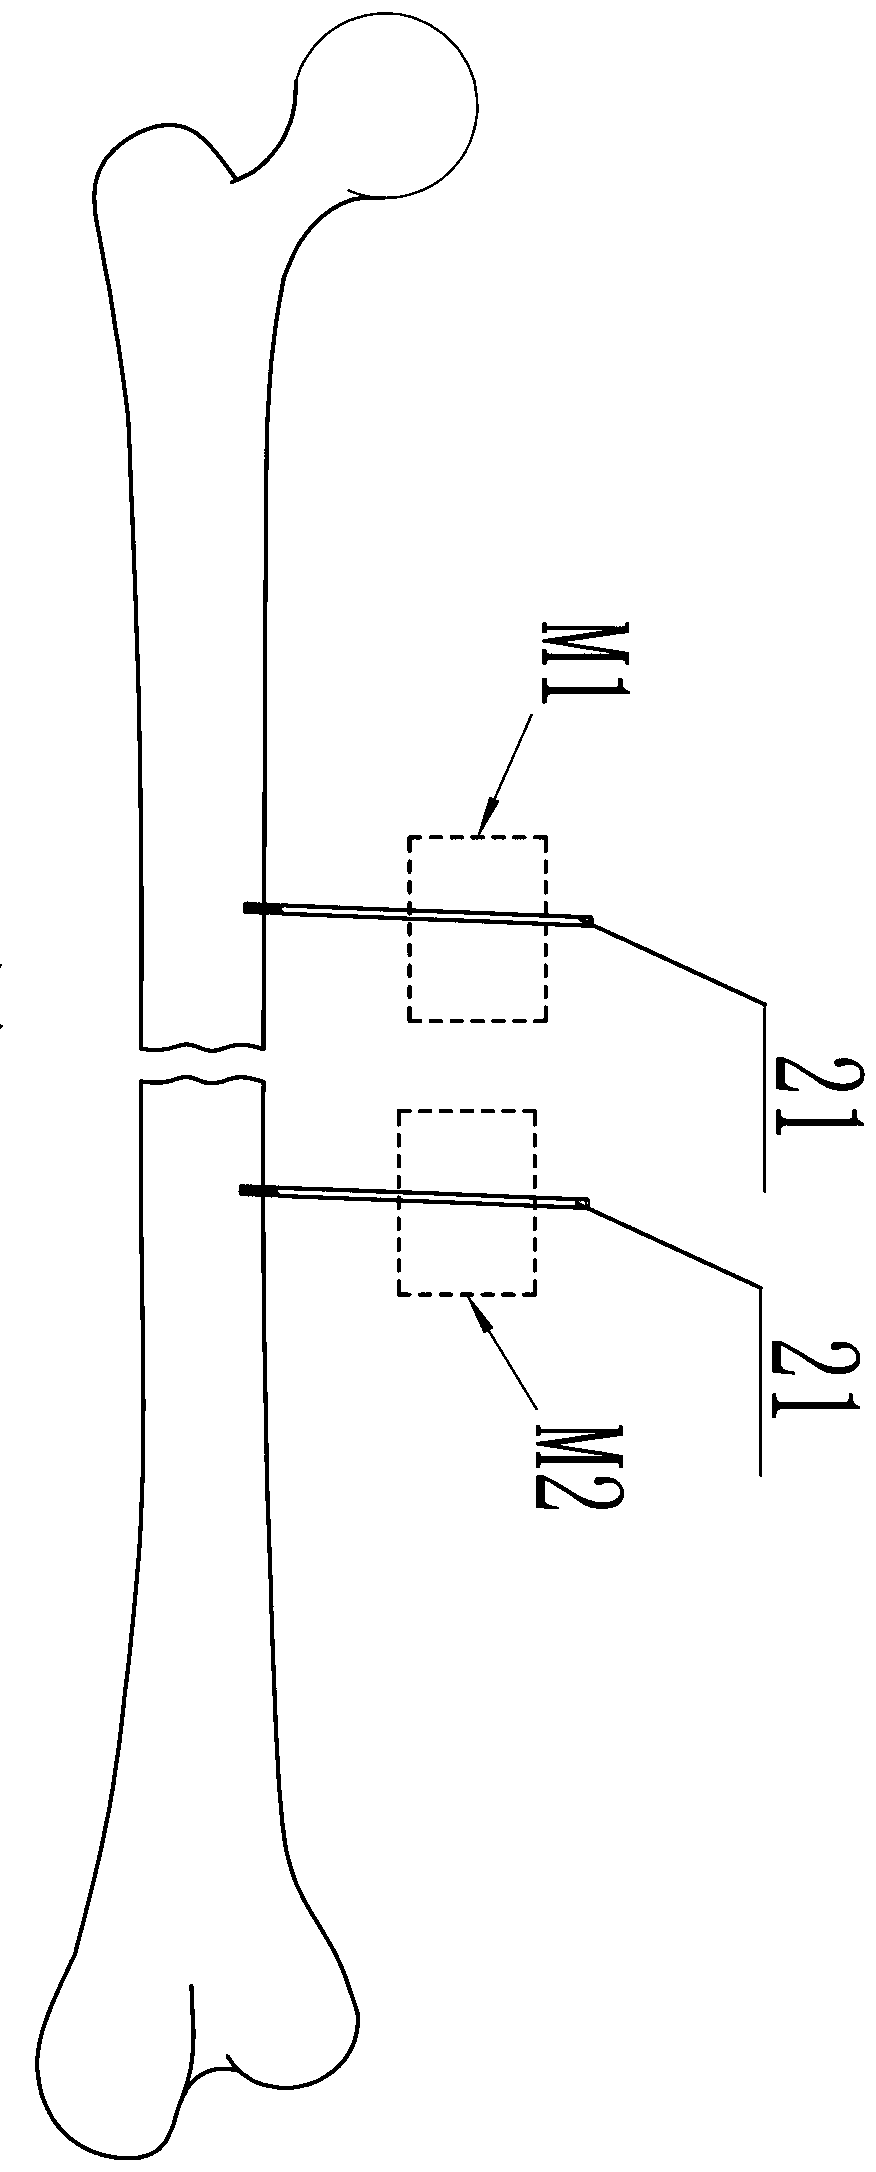 Fracture traction reduction device